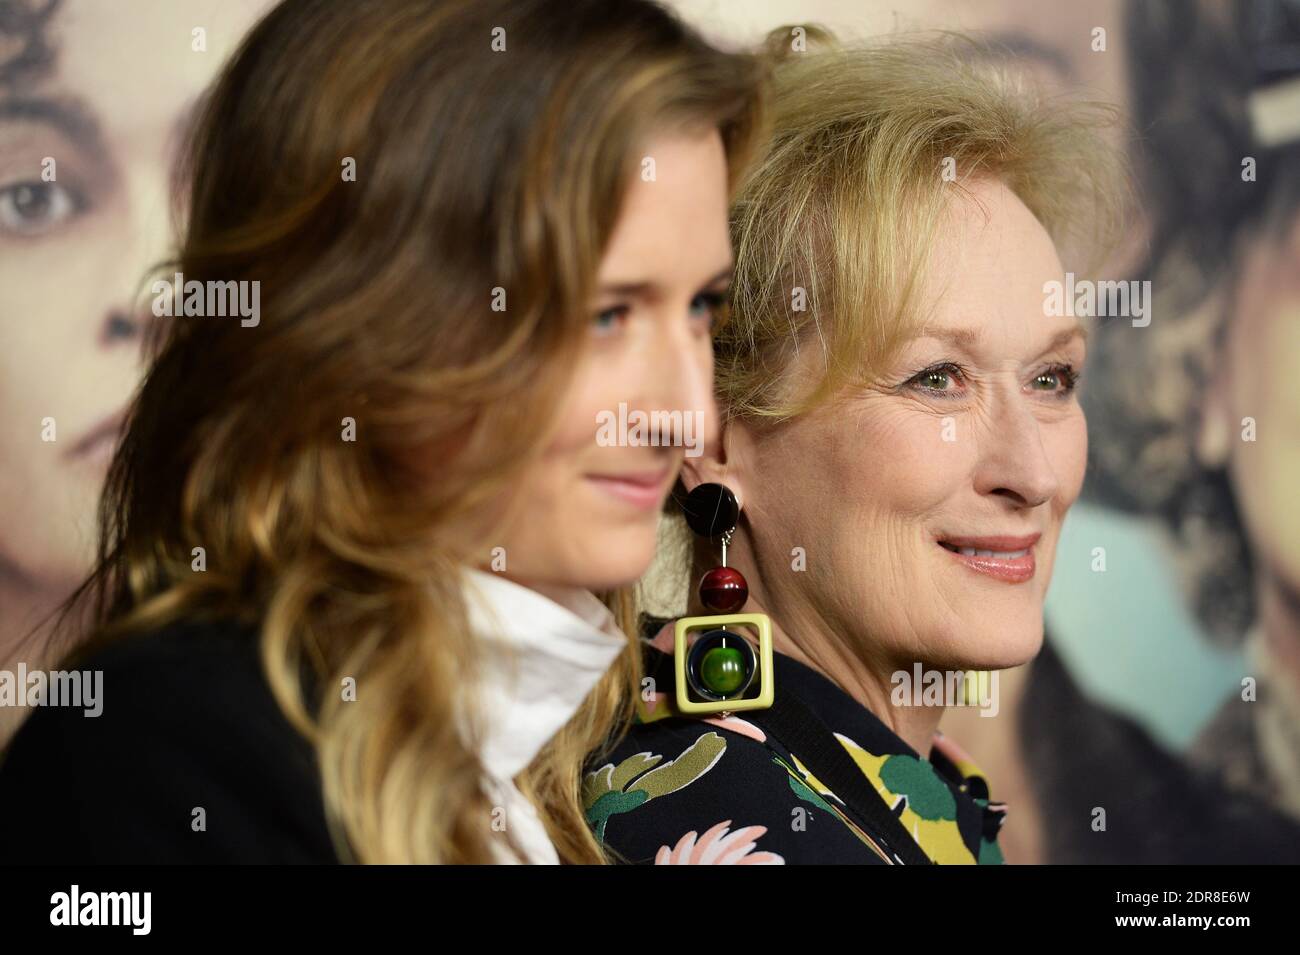 Grace Gummer and her mother Meryl Streep attend the Los Angeles premiere of Suffragette at the Academy of Motion Pictures Arts and Sciences in Los Angeles, CA, USA, on Octobre 20, 2015. Photo by Lionel Hahn/ABACAPRESS.COM Stock Photo